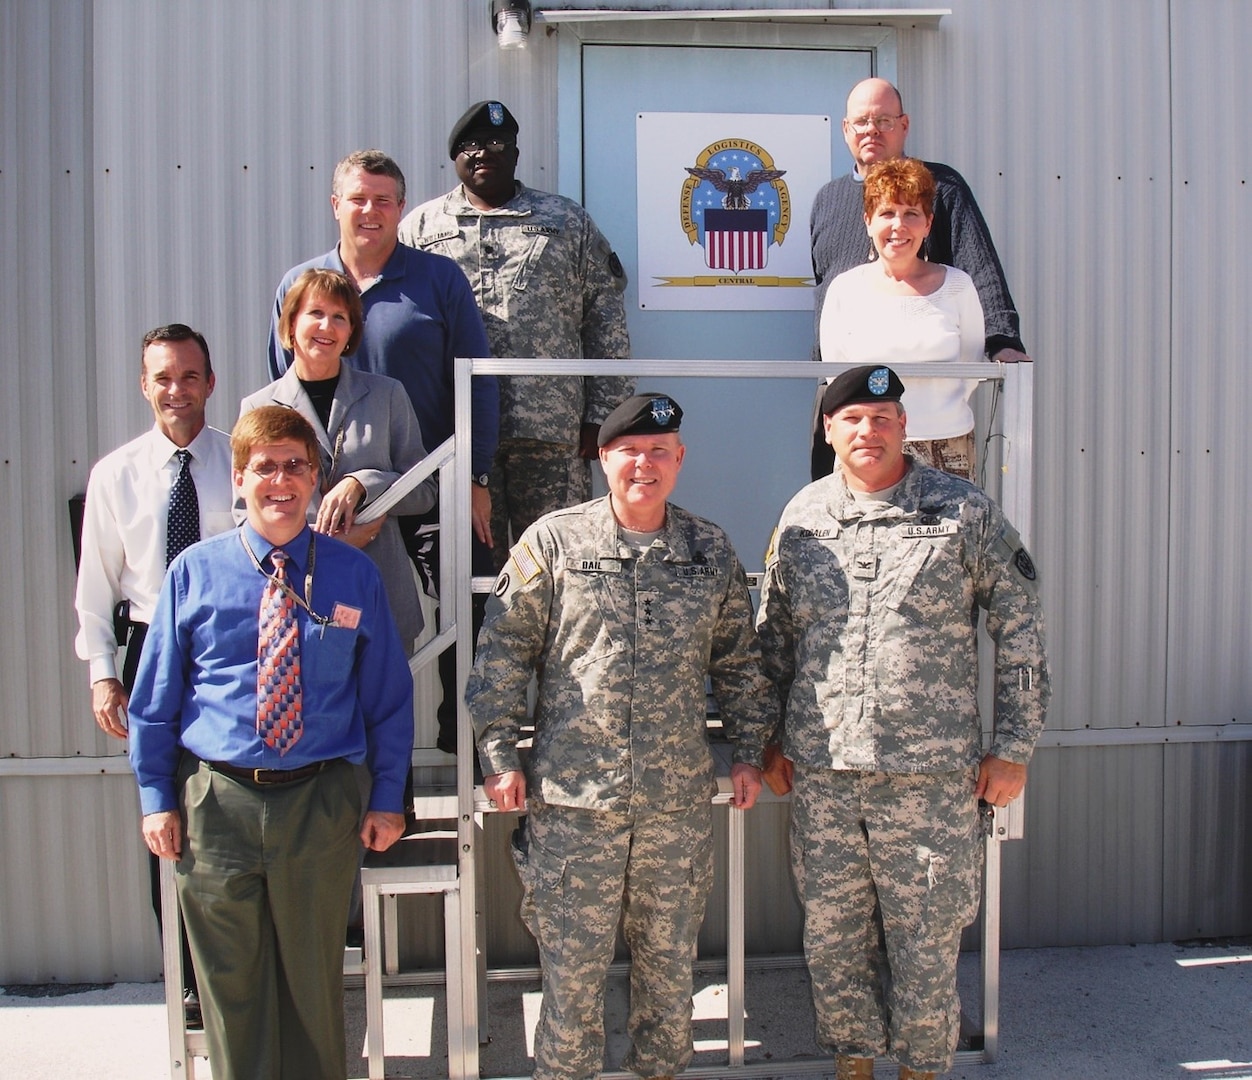 Group of seven men and two women pose during a May 2009 visit to MacDill Air Force Base in Tampa, Florida, from Former DLA Director Army Lt. Gen. Robert Dail.